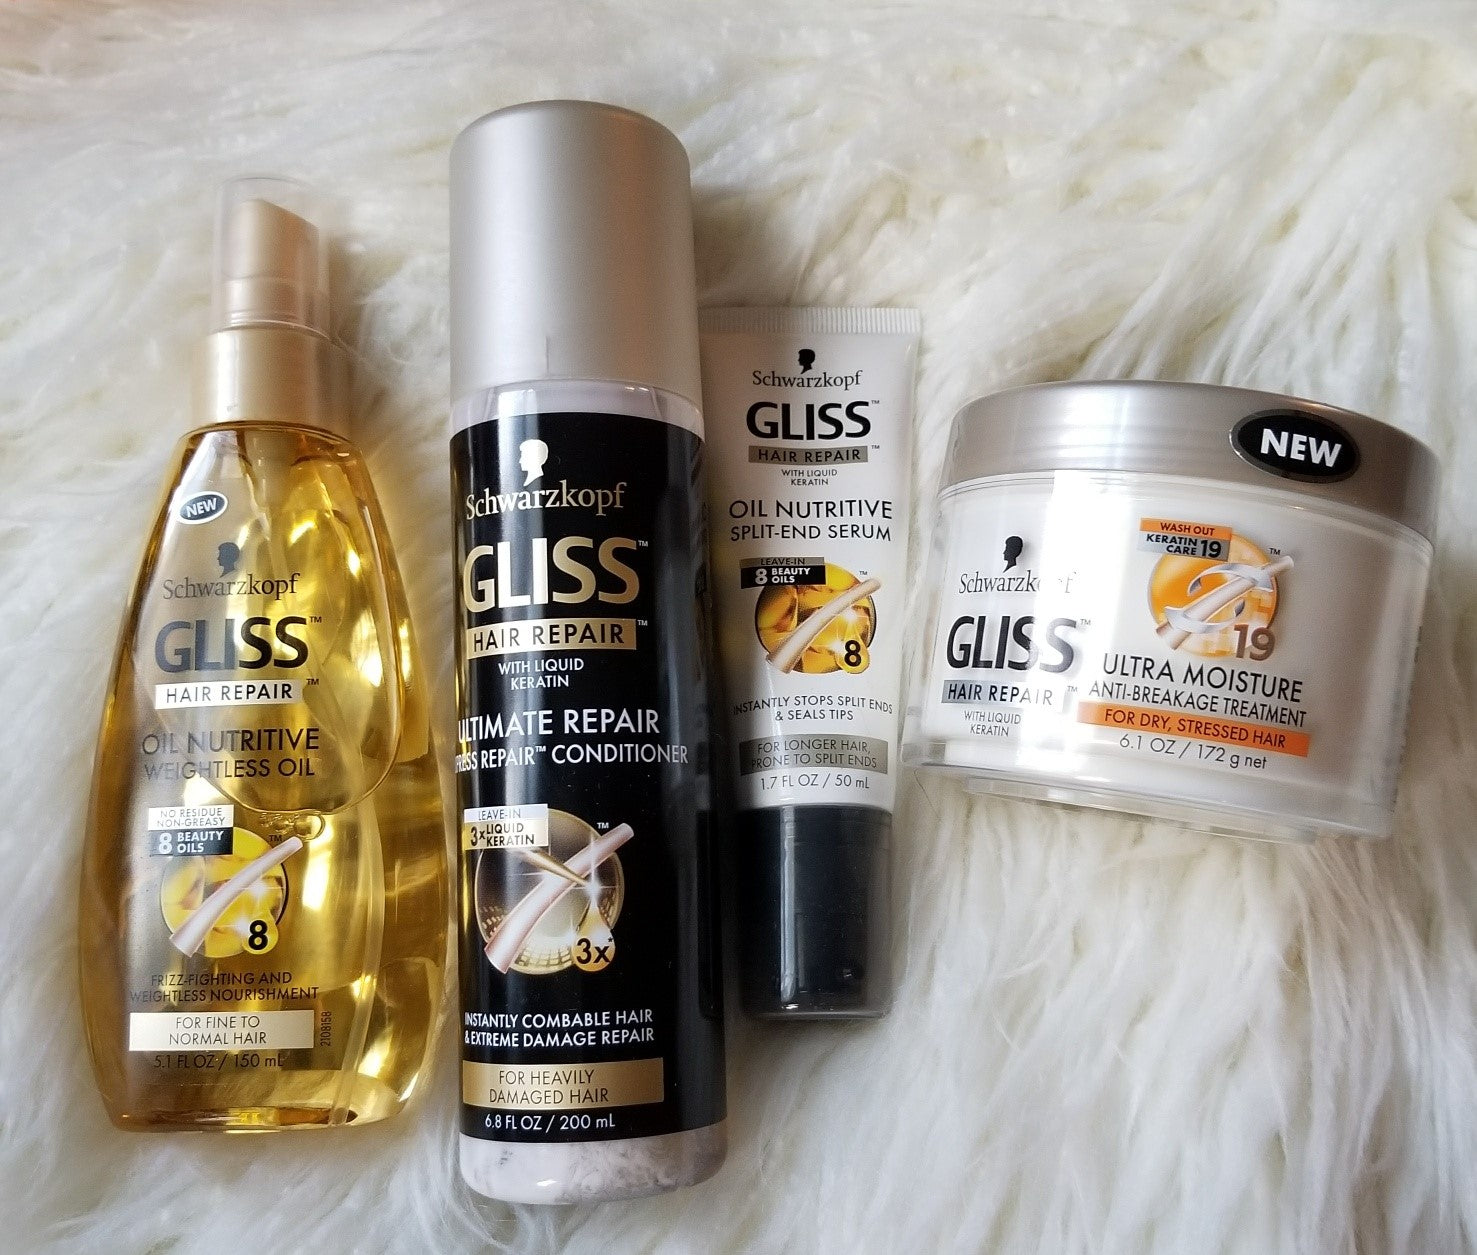 Review, Photos, Ingredients, Hairstyle, Haircare Trend 2017, 2018, 2019: Schwarzkopf Split-End Serum, Oil Nutritive Weightless Oil, Express Repair Conditioner, Anti-Breakage Treatment